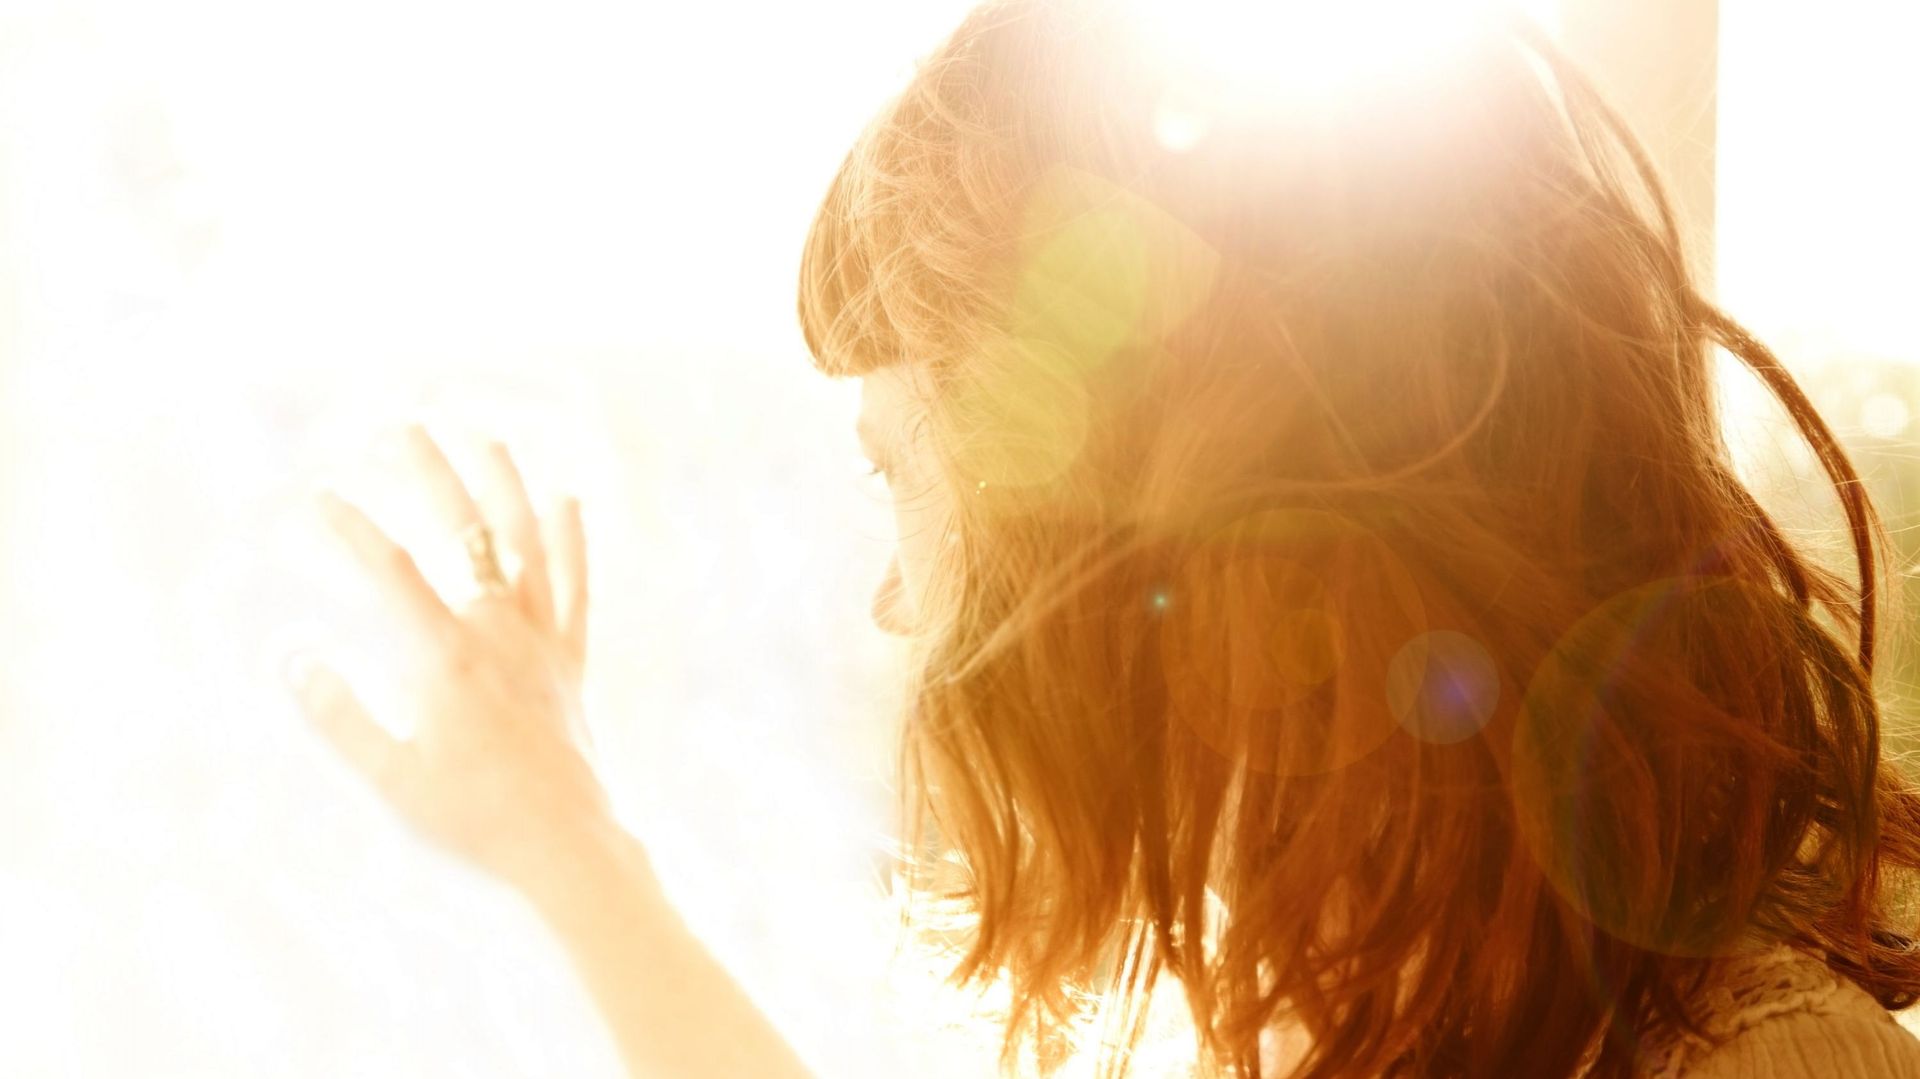 Redhead woman backlit by sun with hand on glass window